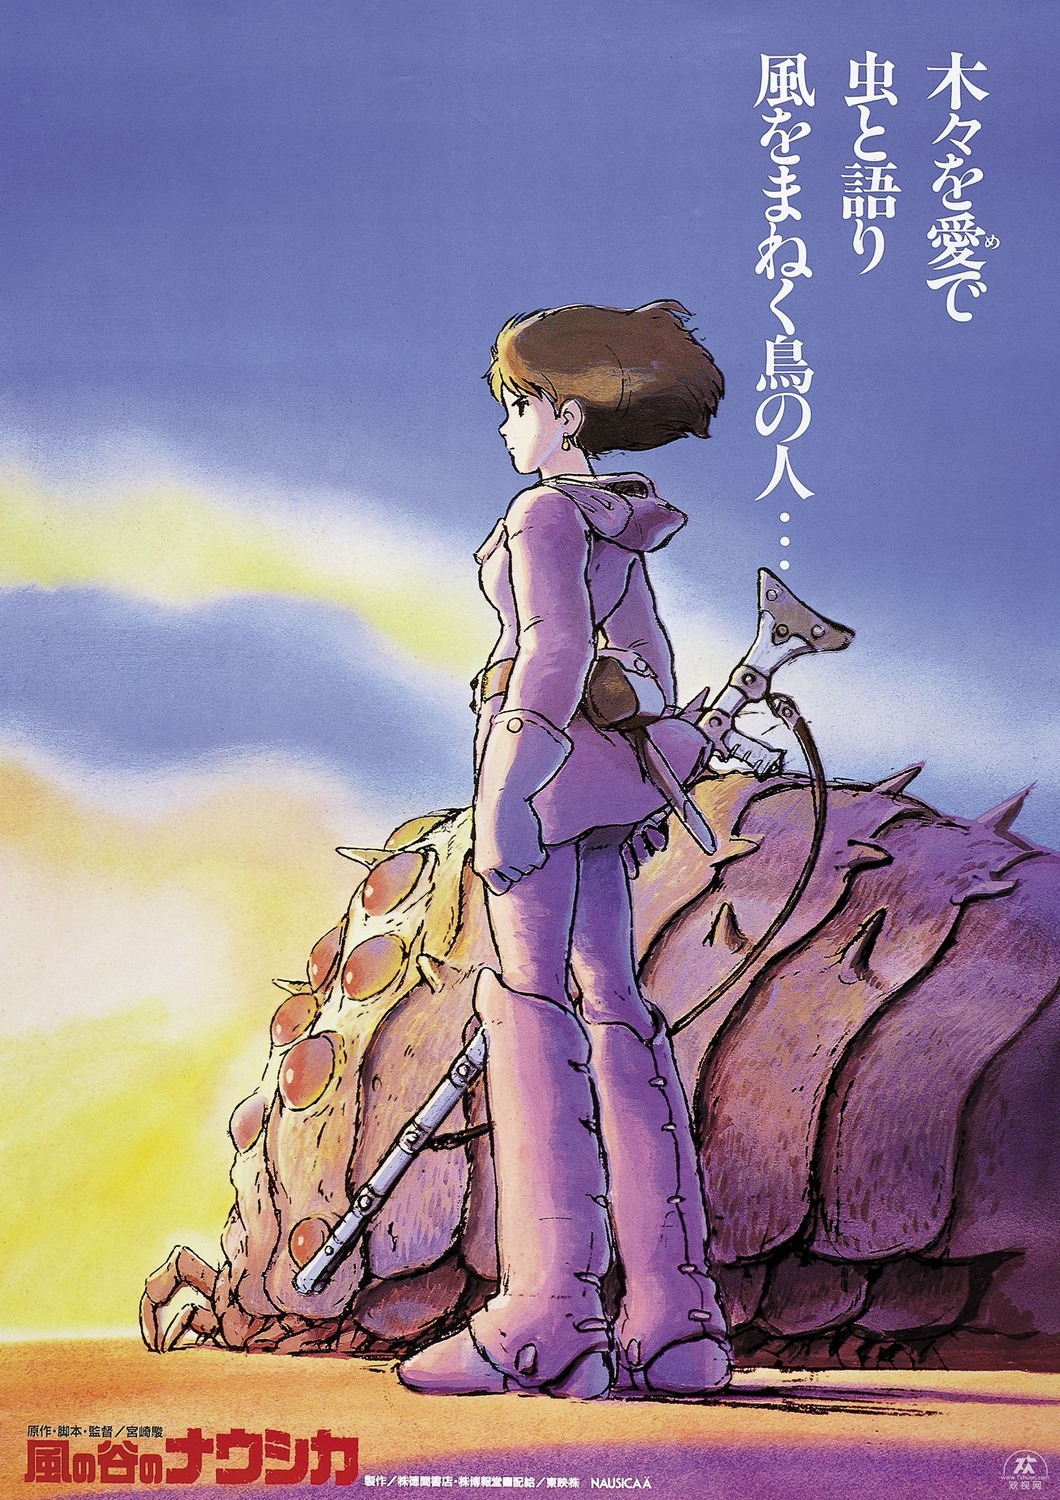 Extra Large Movie Poster Image for Nausicaä of the Valley of the Winds 